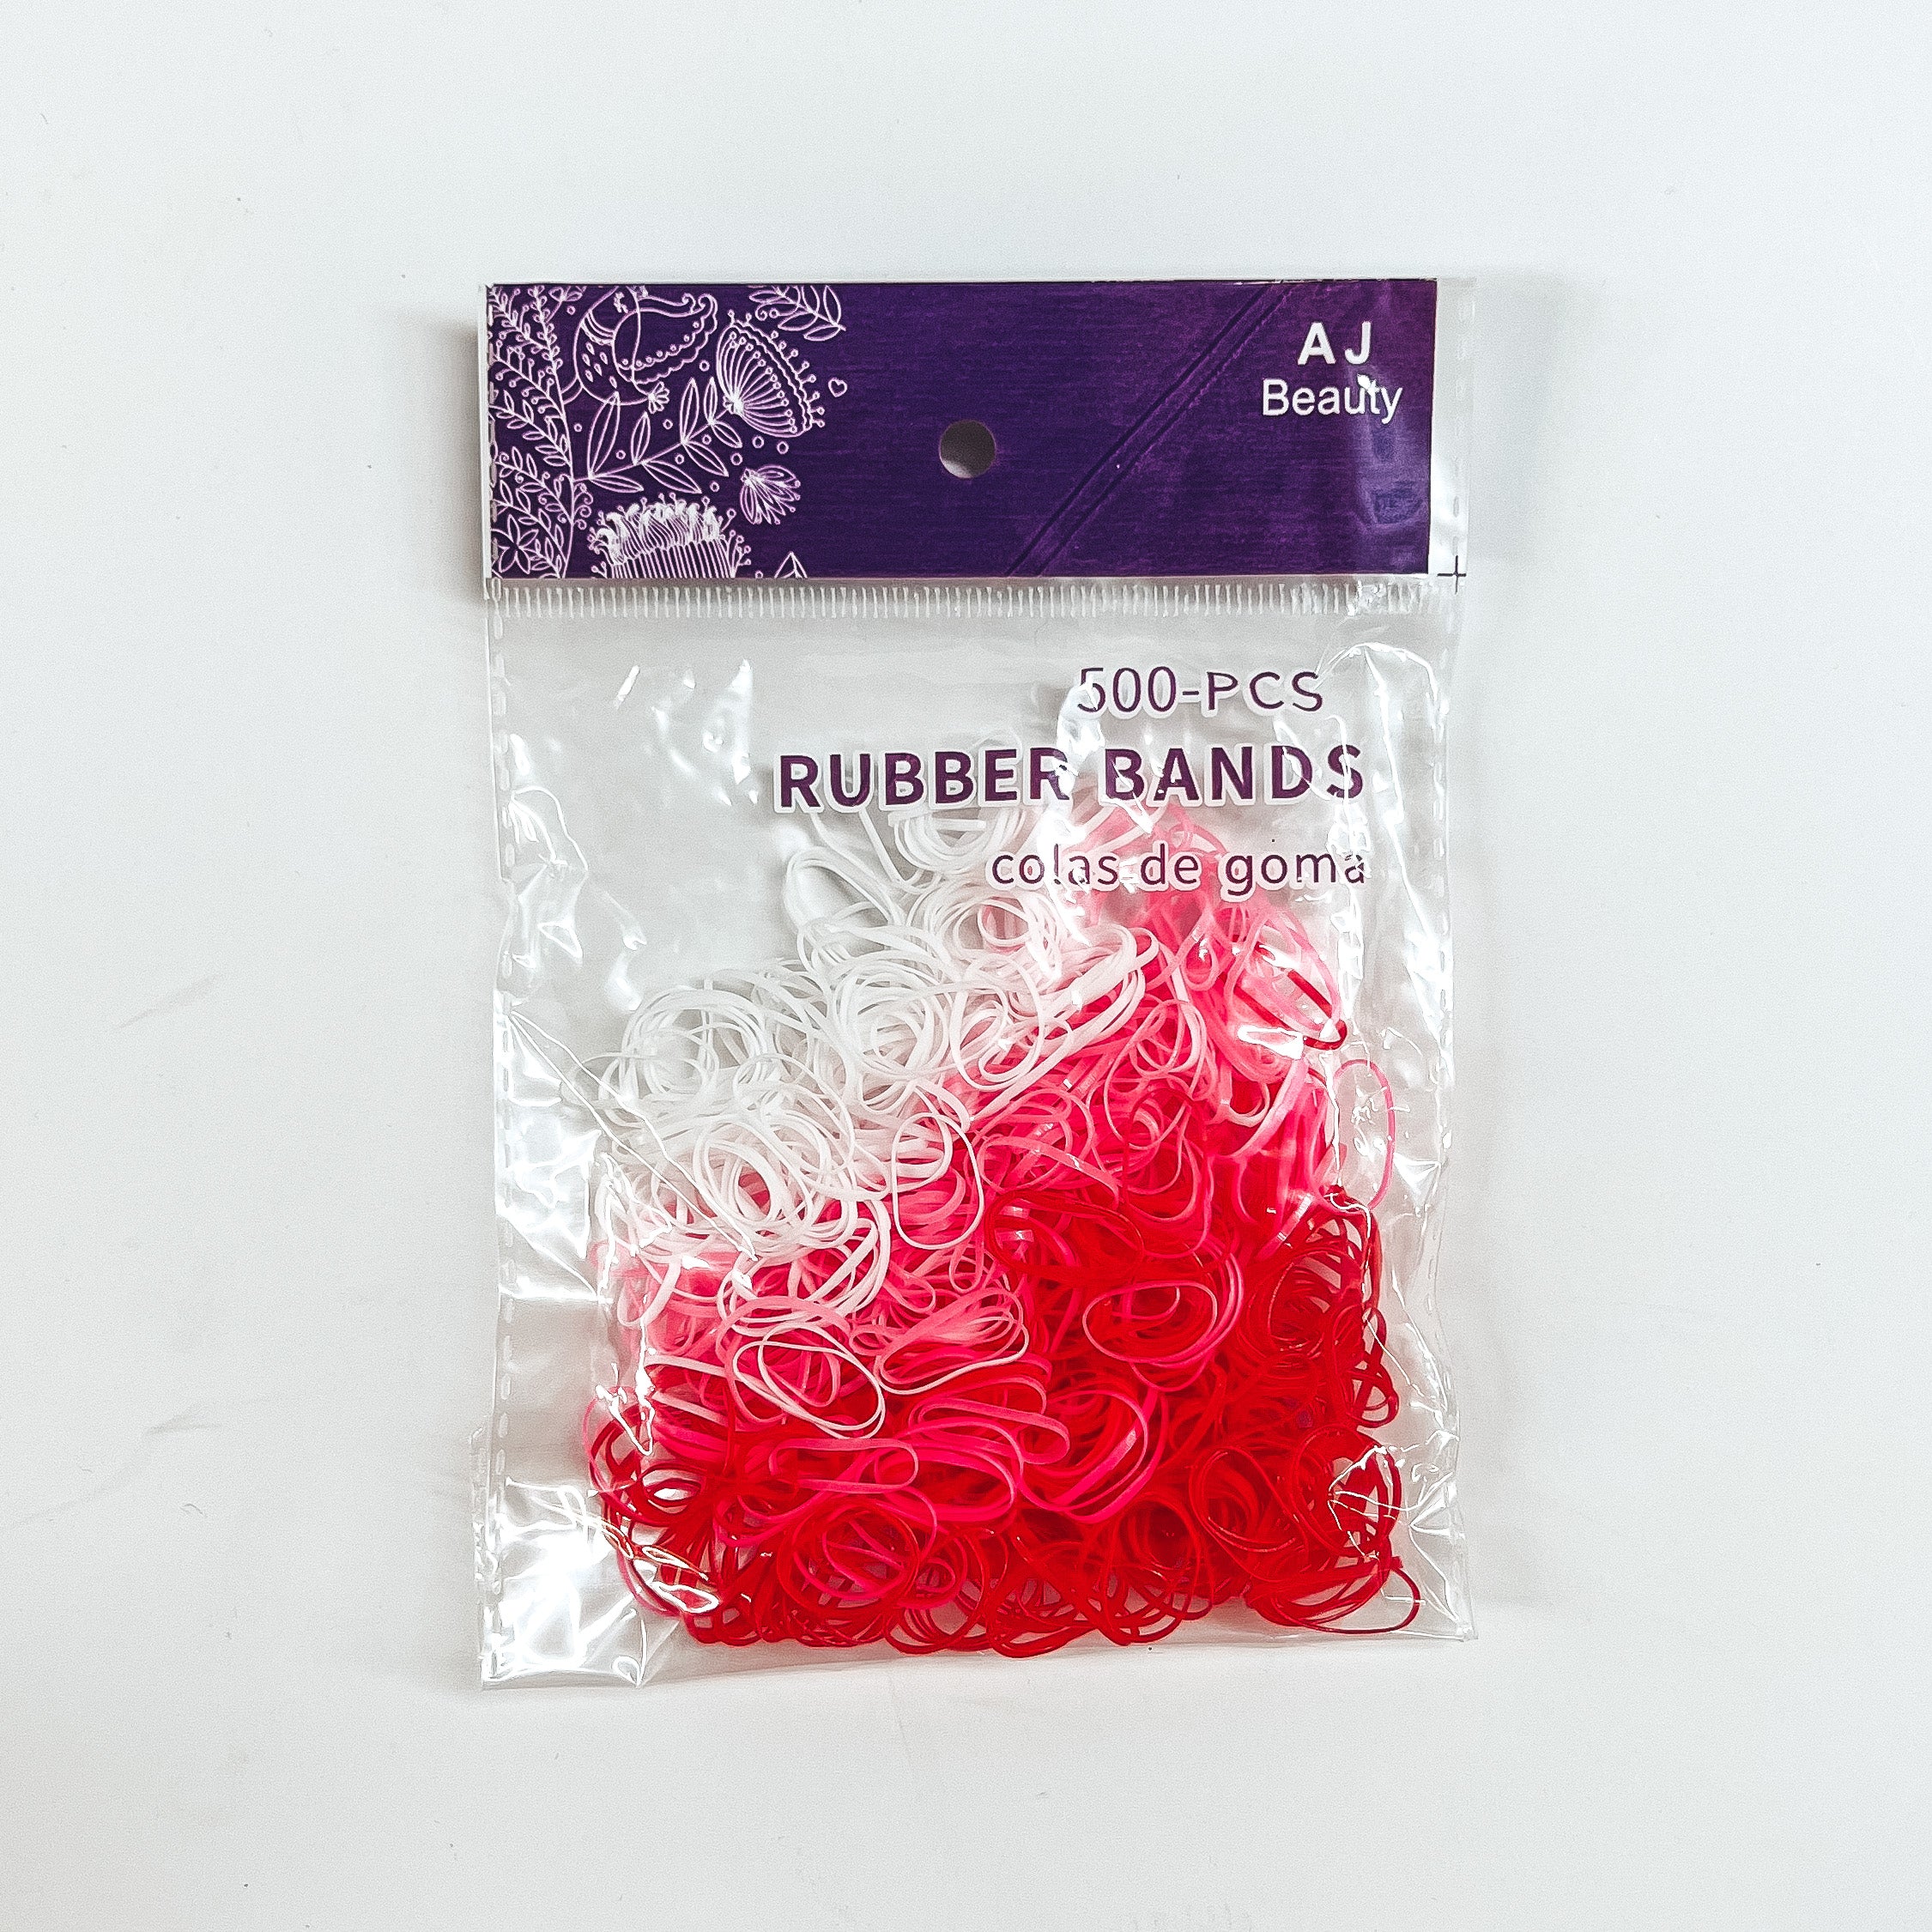 This is a pack of 500 small rubber bands in different colors such as white,  red, and light pink.  This clear and purple pack is taken on a white background.